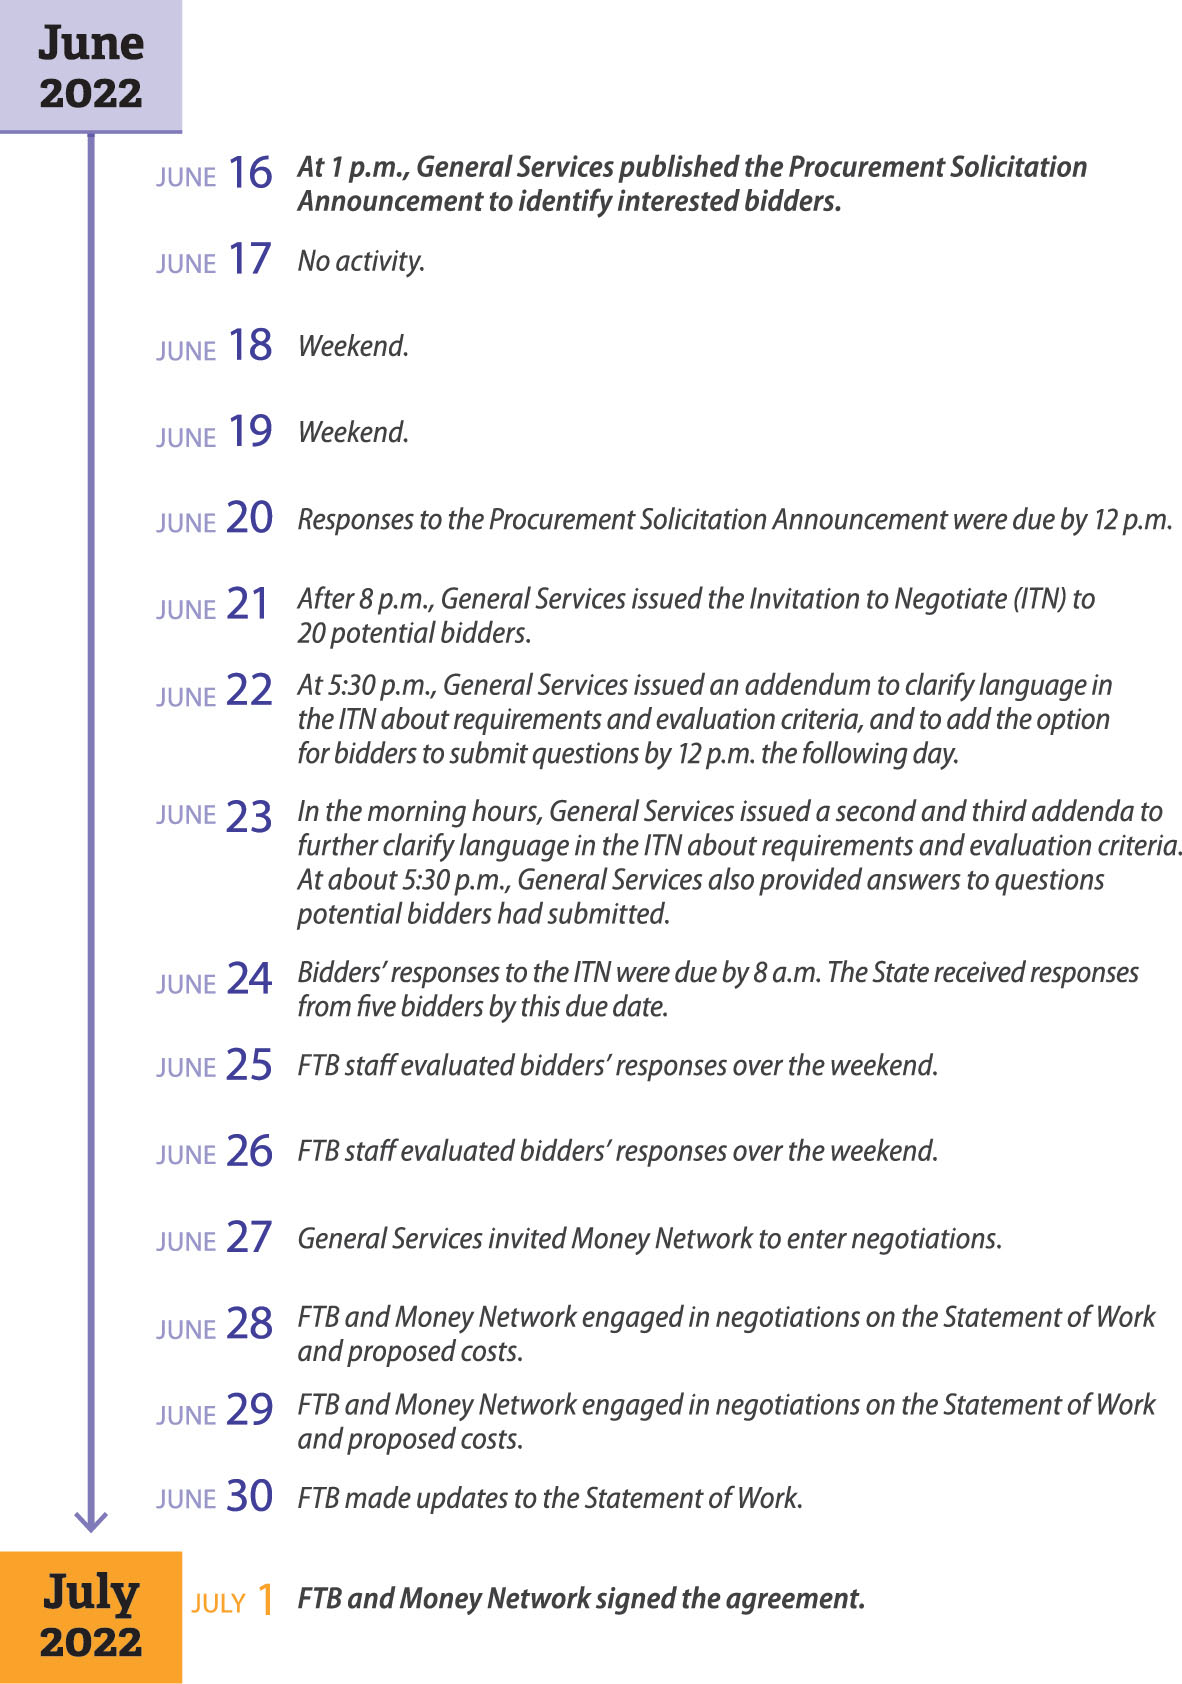 A timeline that shows the steps the State took to procure a vendor for the Middle Class Tax Refund program in only 16 days.